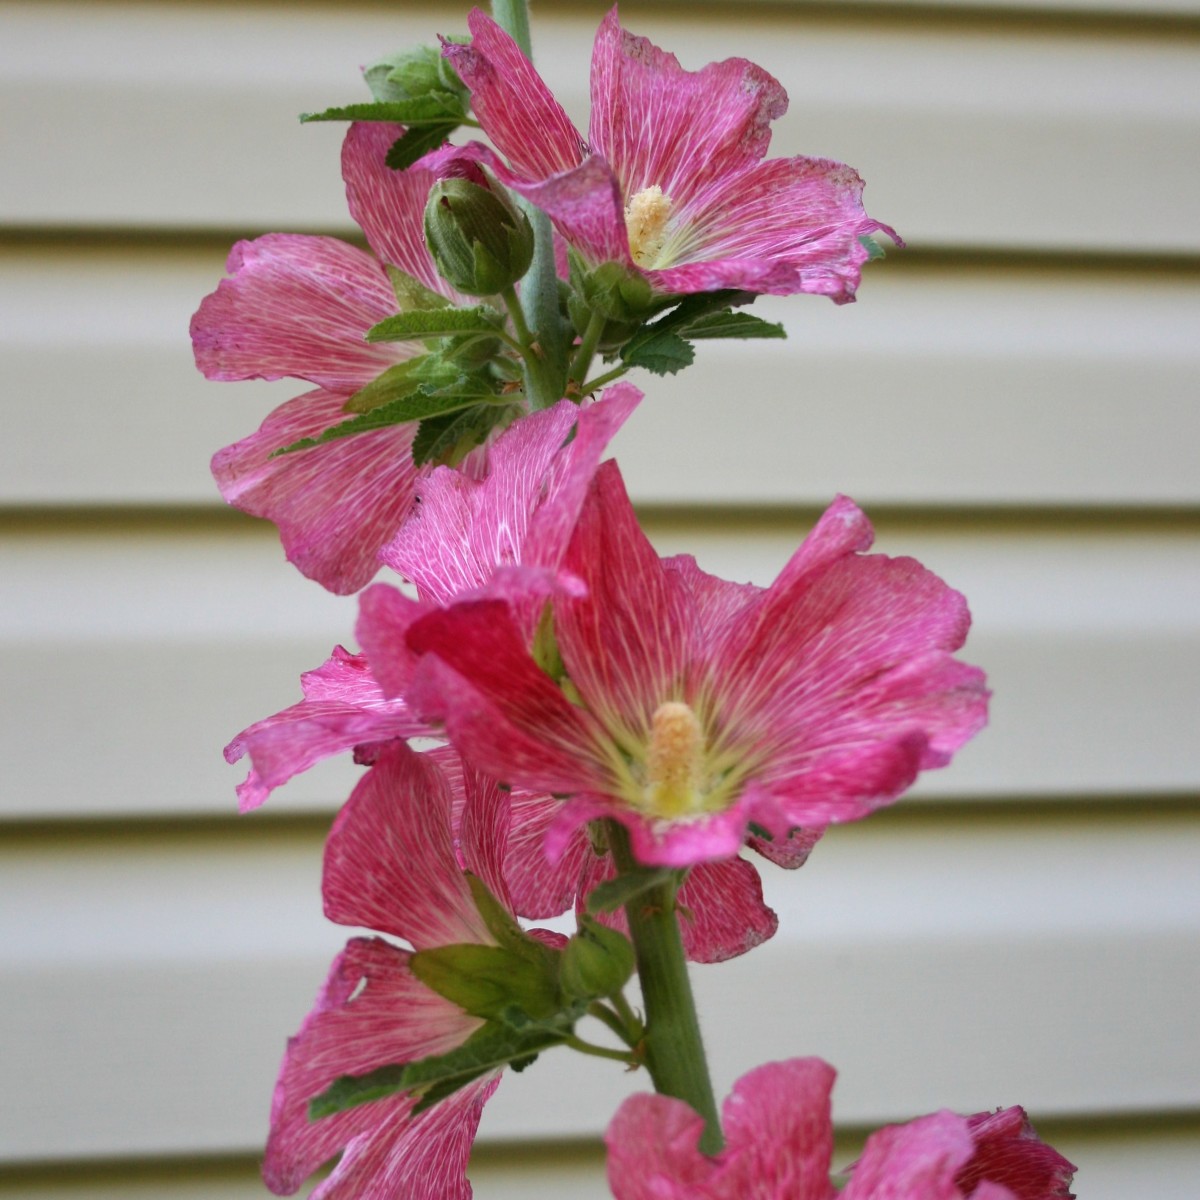 Hollyhocks are biennial nectar plants. We grew ours from seed, sowing them in the fall for blooms in the spring.